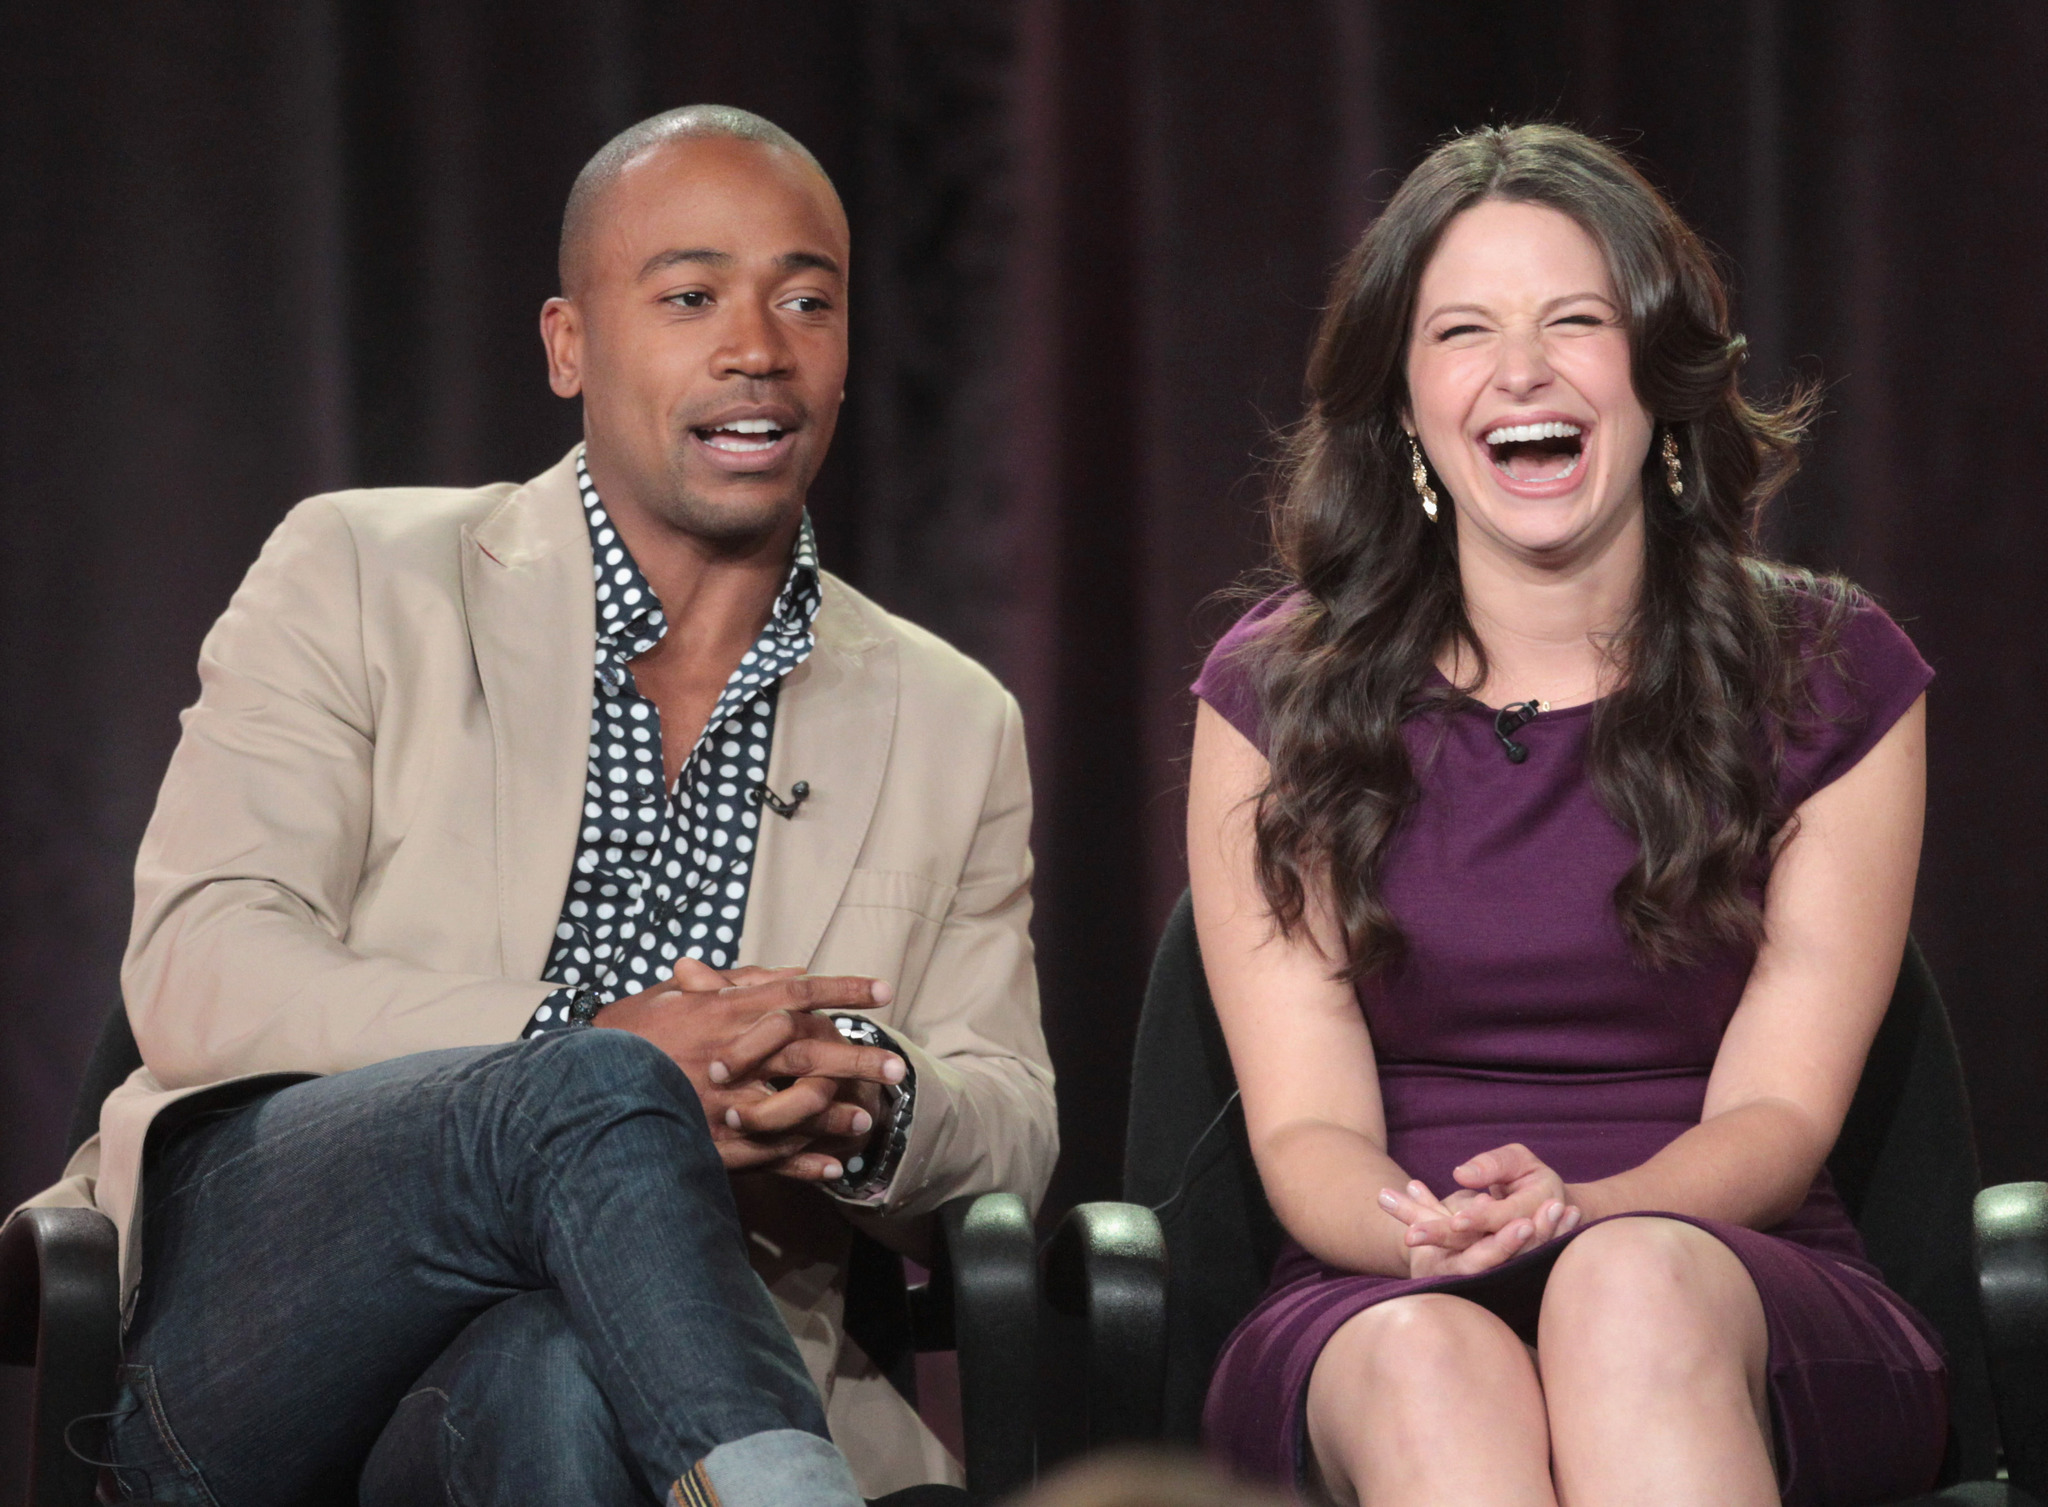 Columbus Short and Katie Lowes